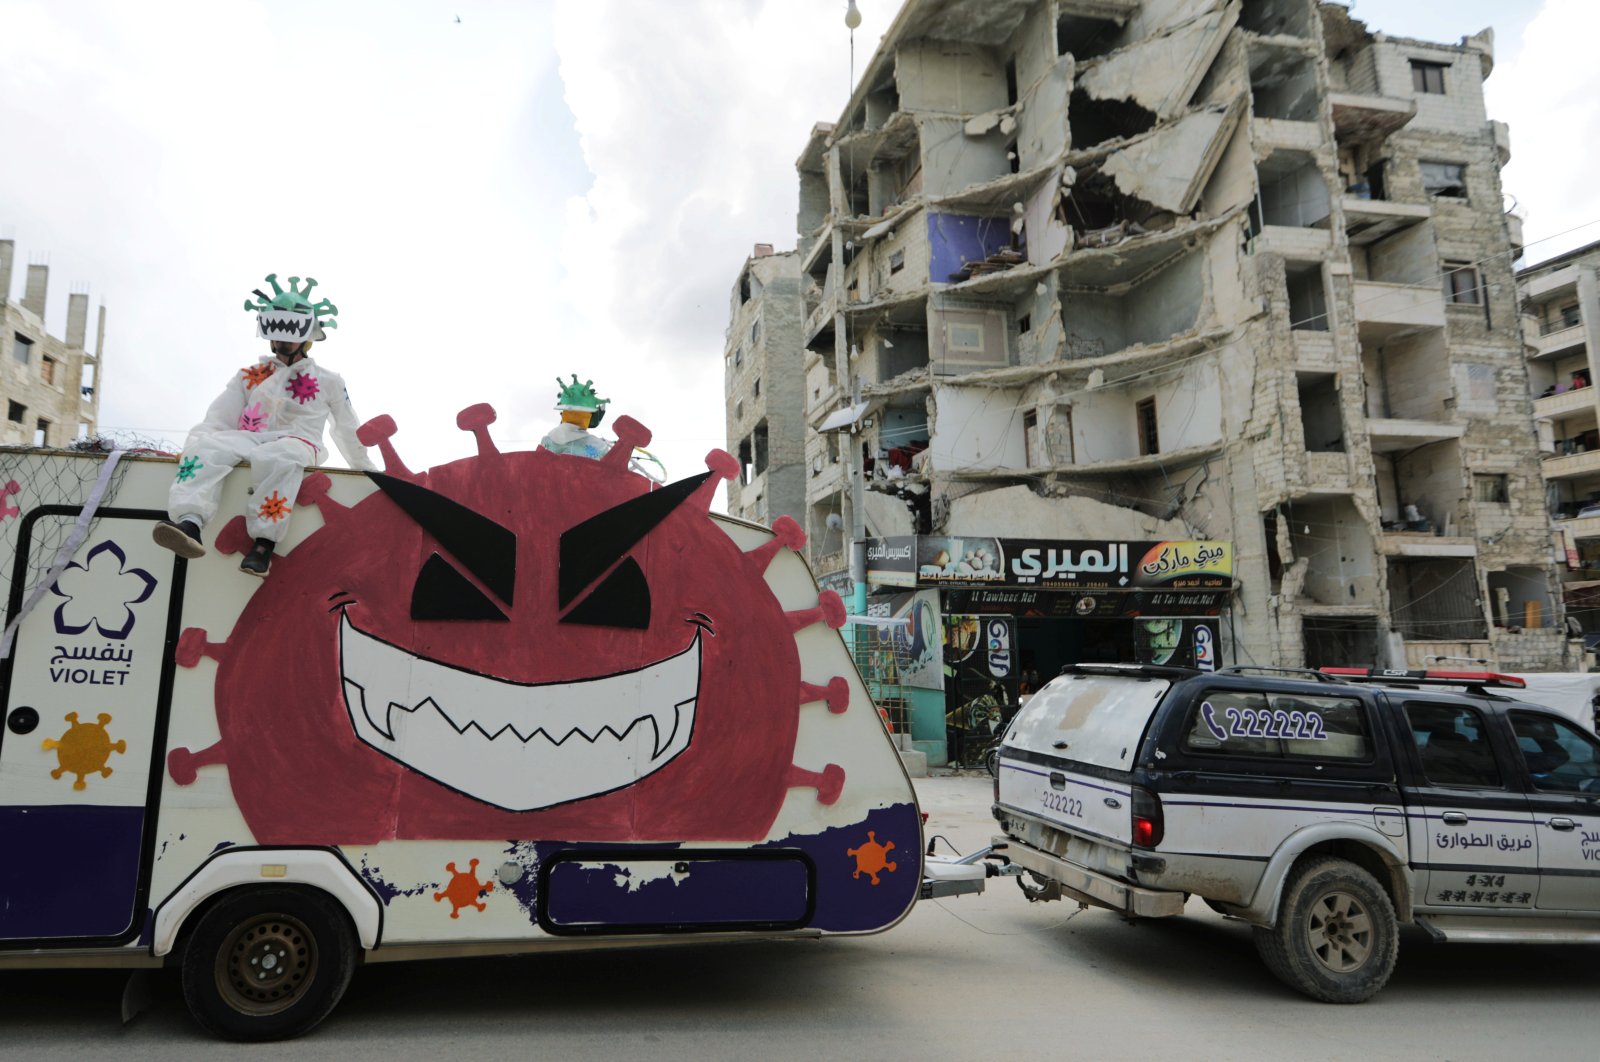 Volunteers dressed in coronavirus-themed costumes stand on a vehicle during a campaign organised by the Violet Organization, in an effort to spread awareness and encourage safety amid coronavirus disease (COVID-19) fears, in the opposition-held Idlib city, Syria, April 29, 2020. (REUTERS Photo)